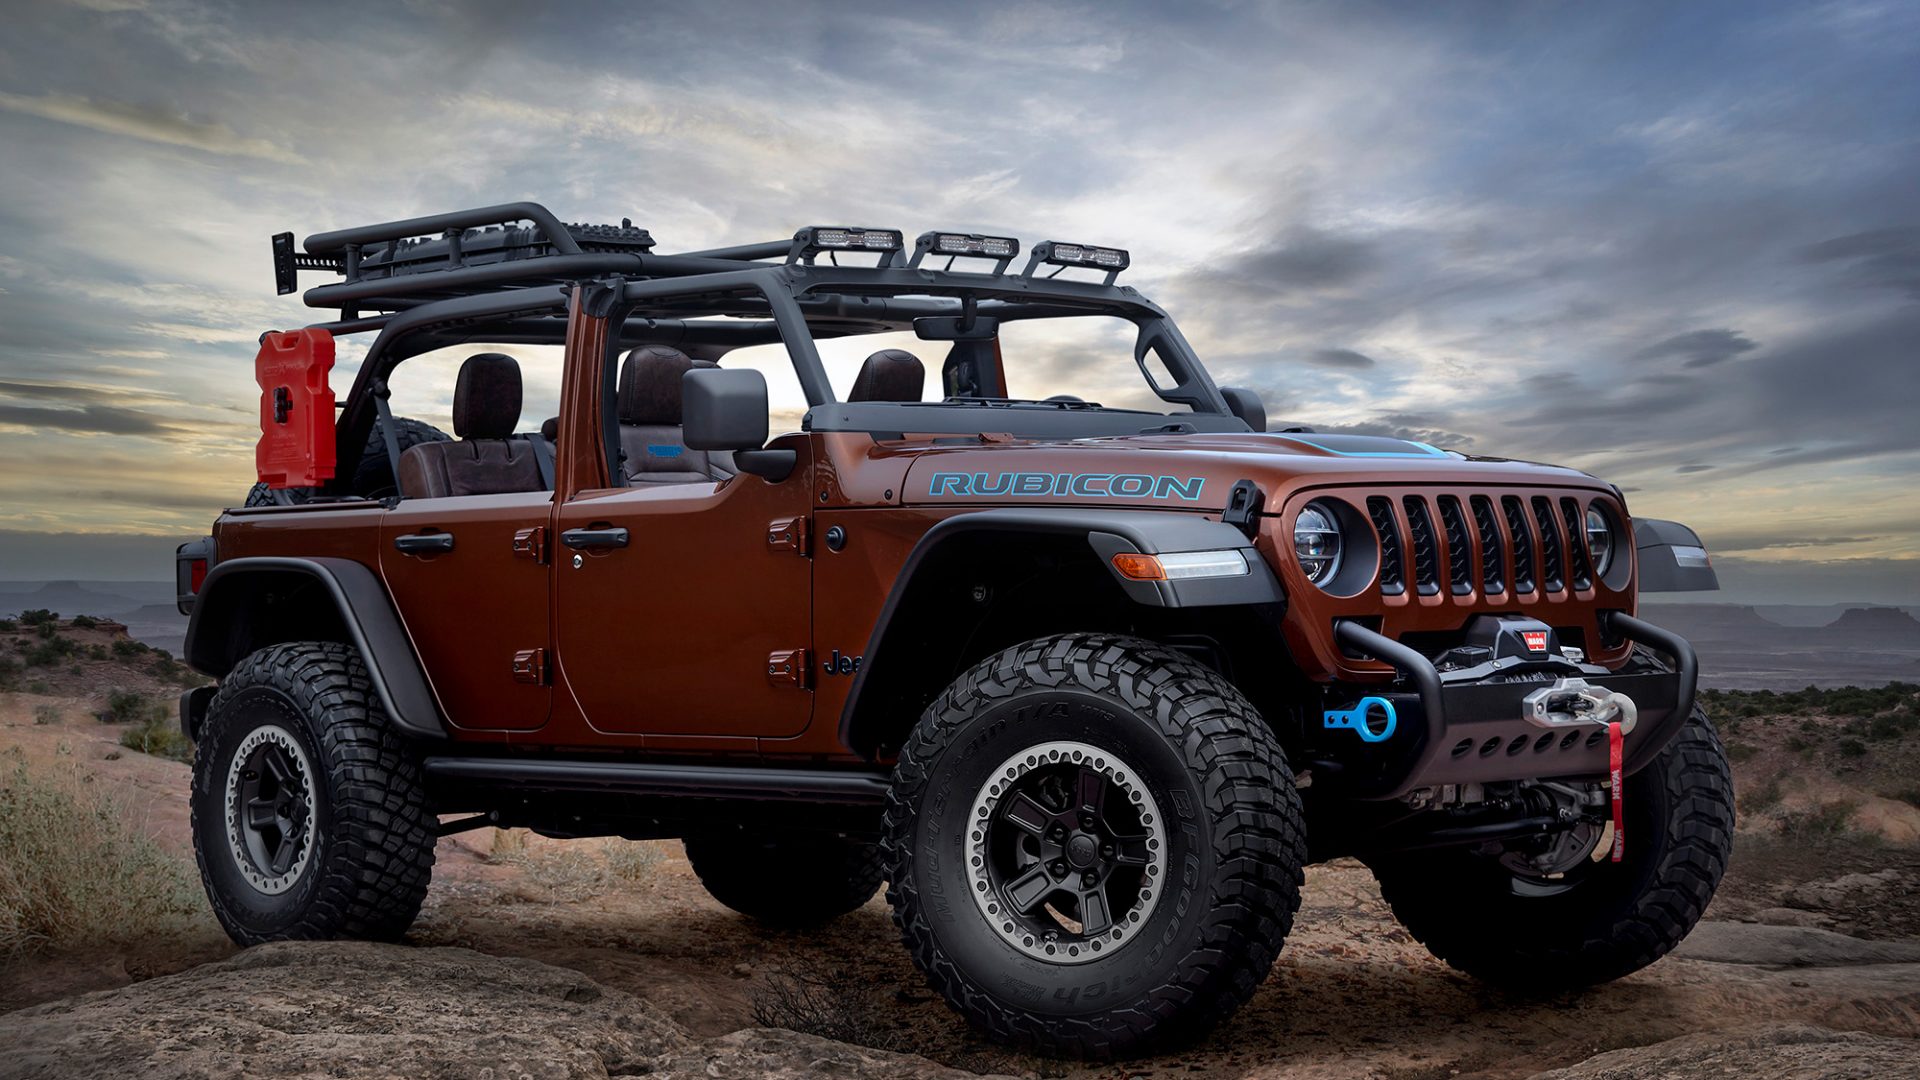 Jeep Birdcage Concept from JPP